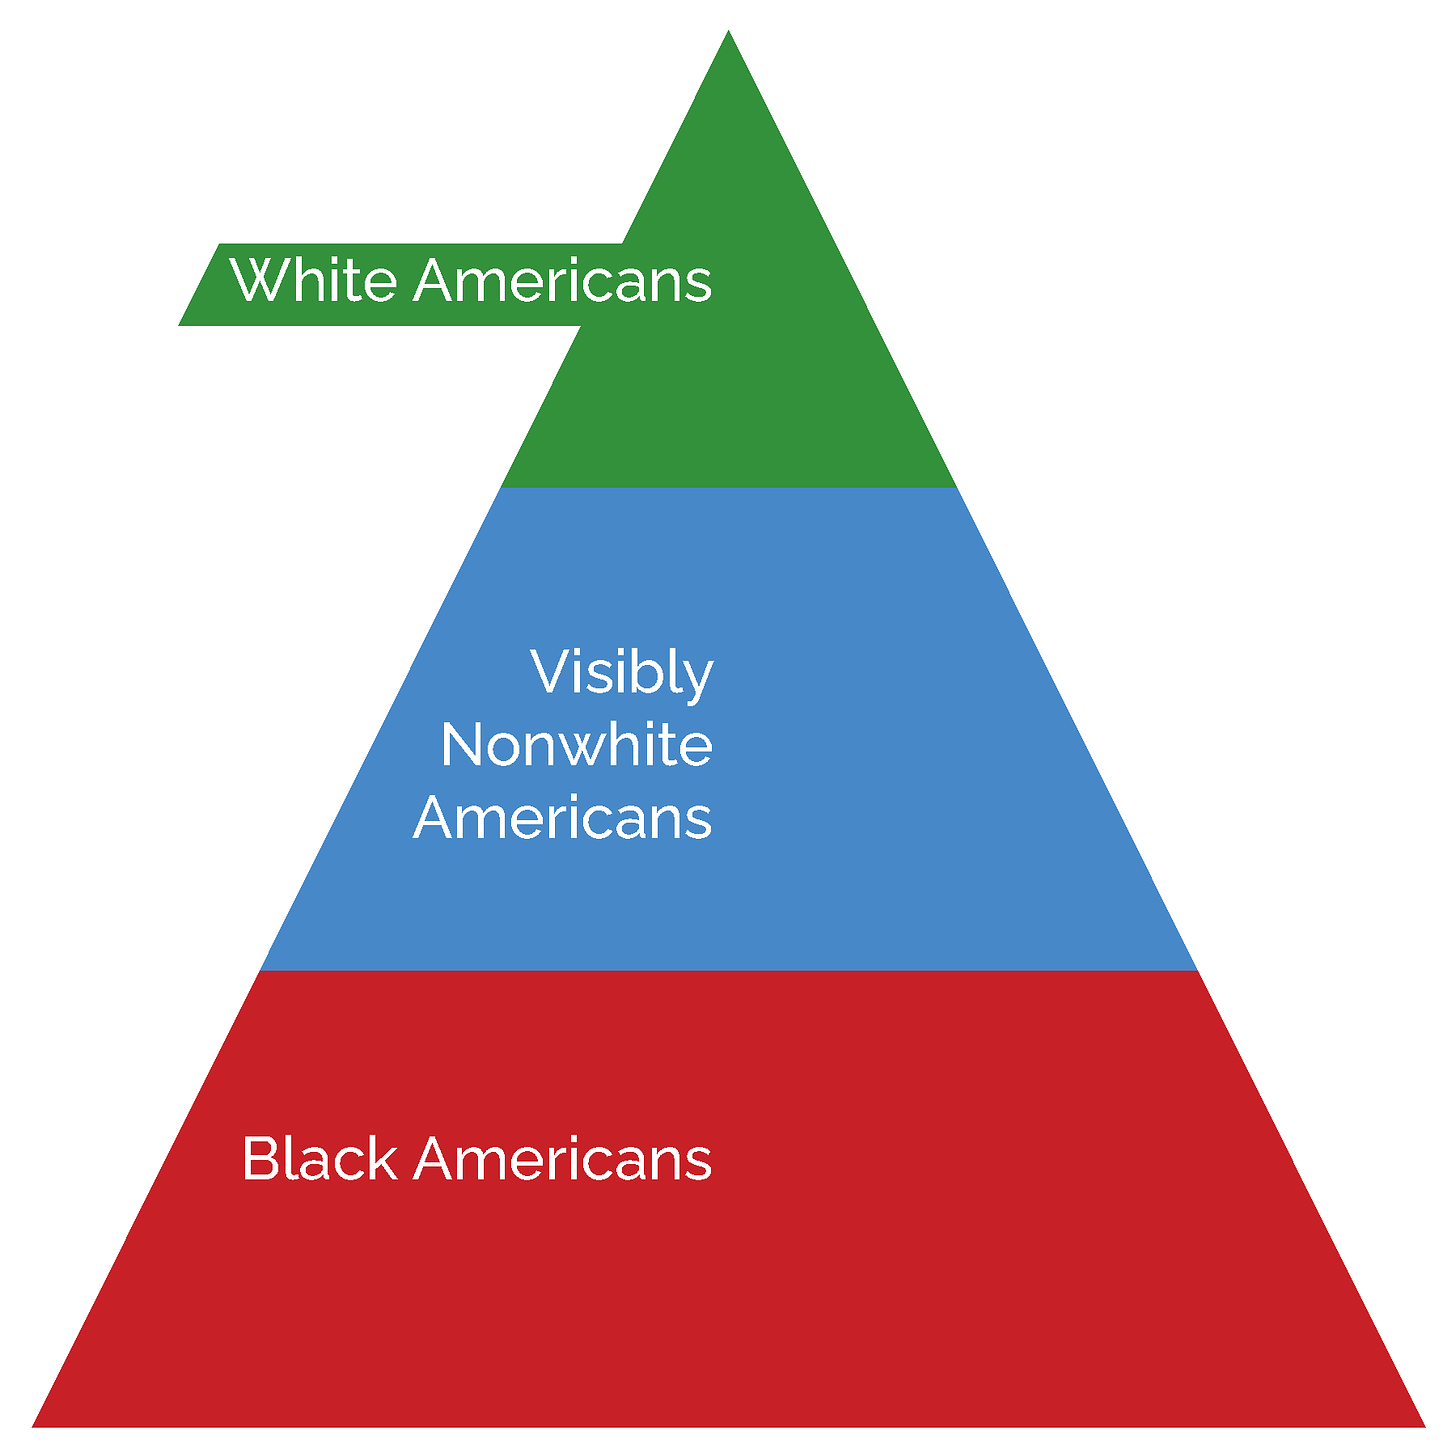 A pyramid which puts white americans on top, nonwhite americans in the middle, and Black americans at the bottom.